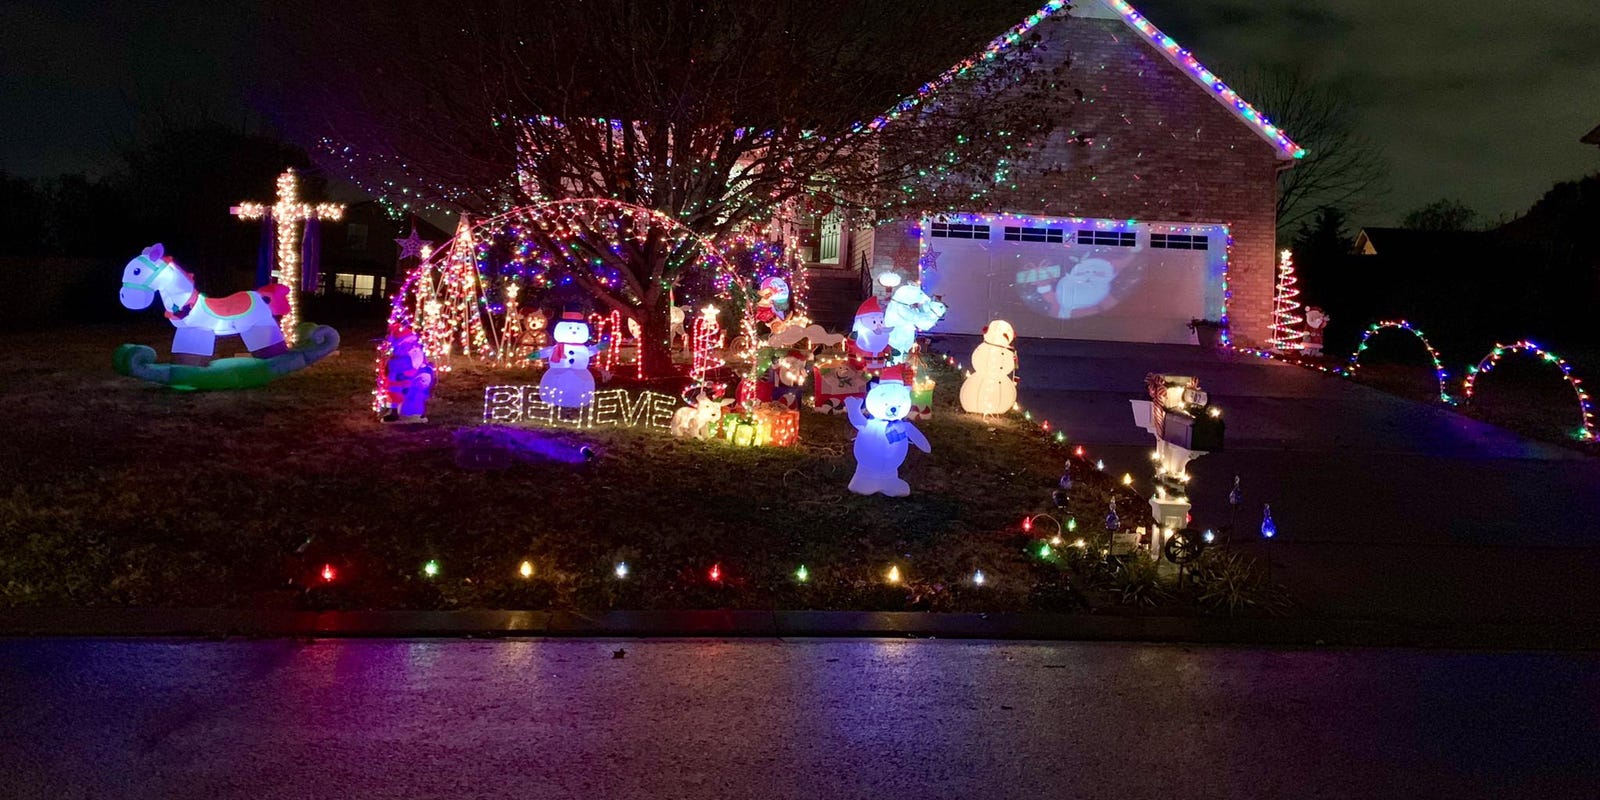 Where to see the best Christmas lights in Murfreesboro, Smyrna and La